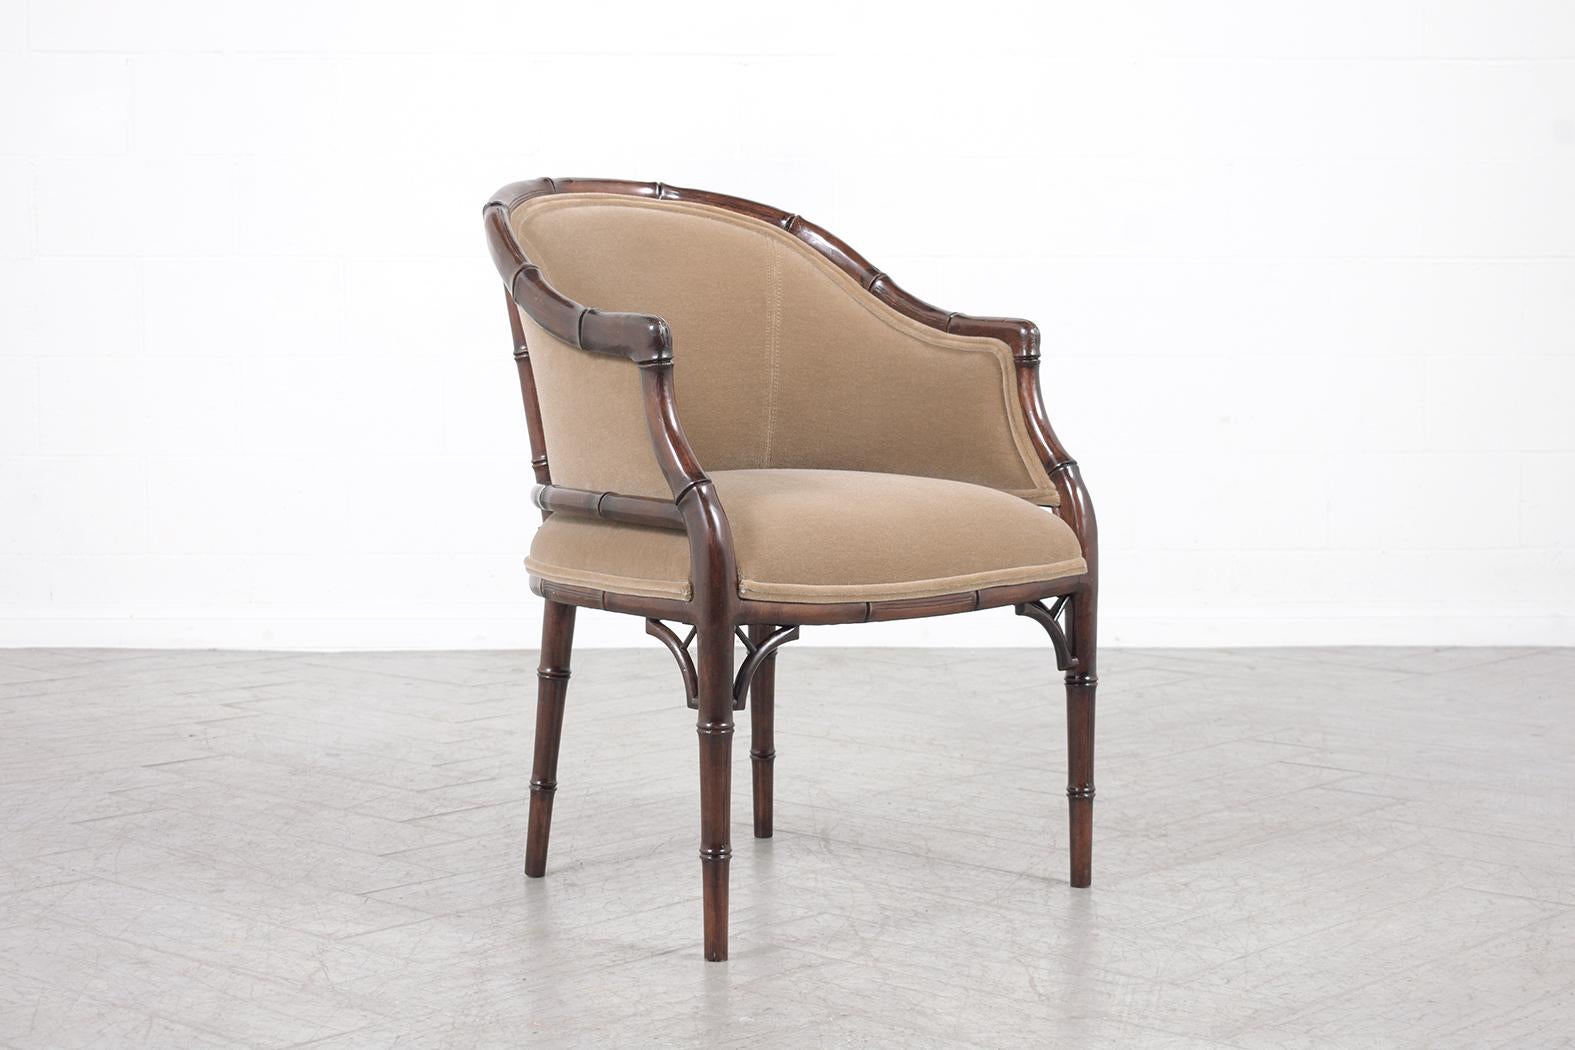 Fabric Elegant Vintage Hollywood Regency Armchairs: Bamboo-Carved and Newly Refurbished For Sale